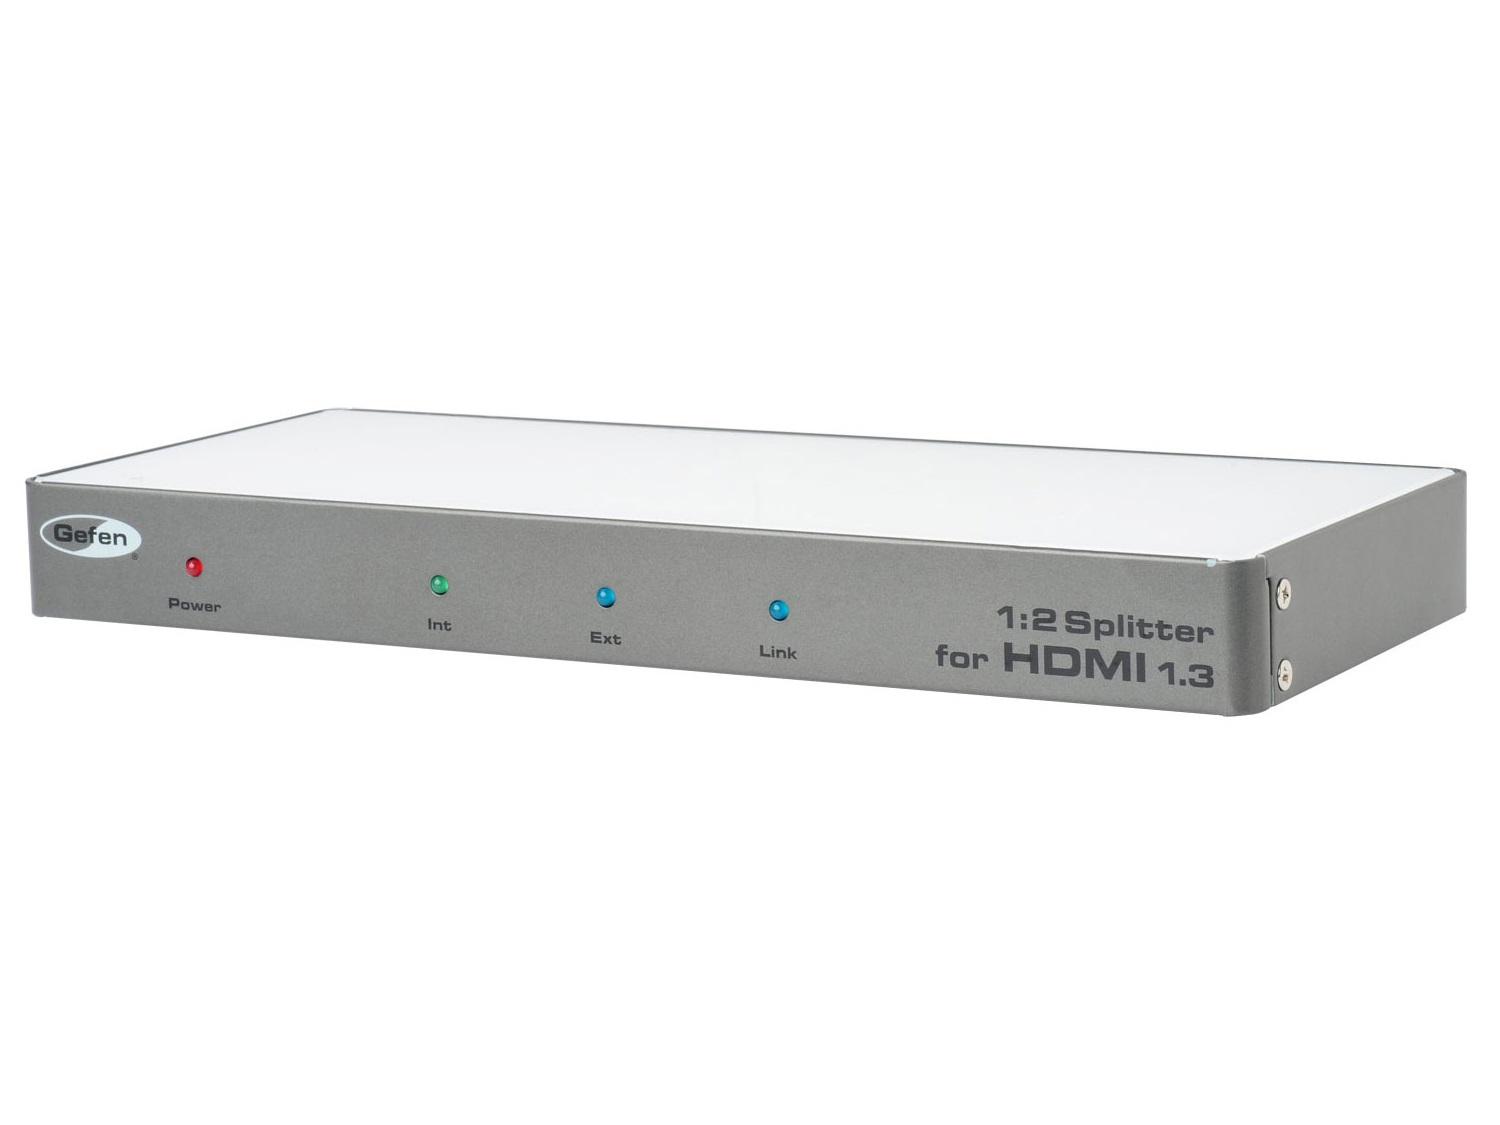 EXT-HDMI1.3-142D 1x2 Splitter for HDMI 1.3 with Digital Audio by Gefen